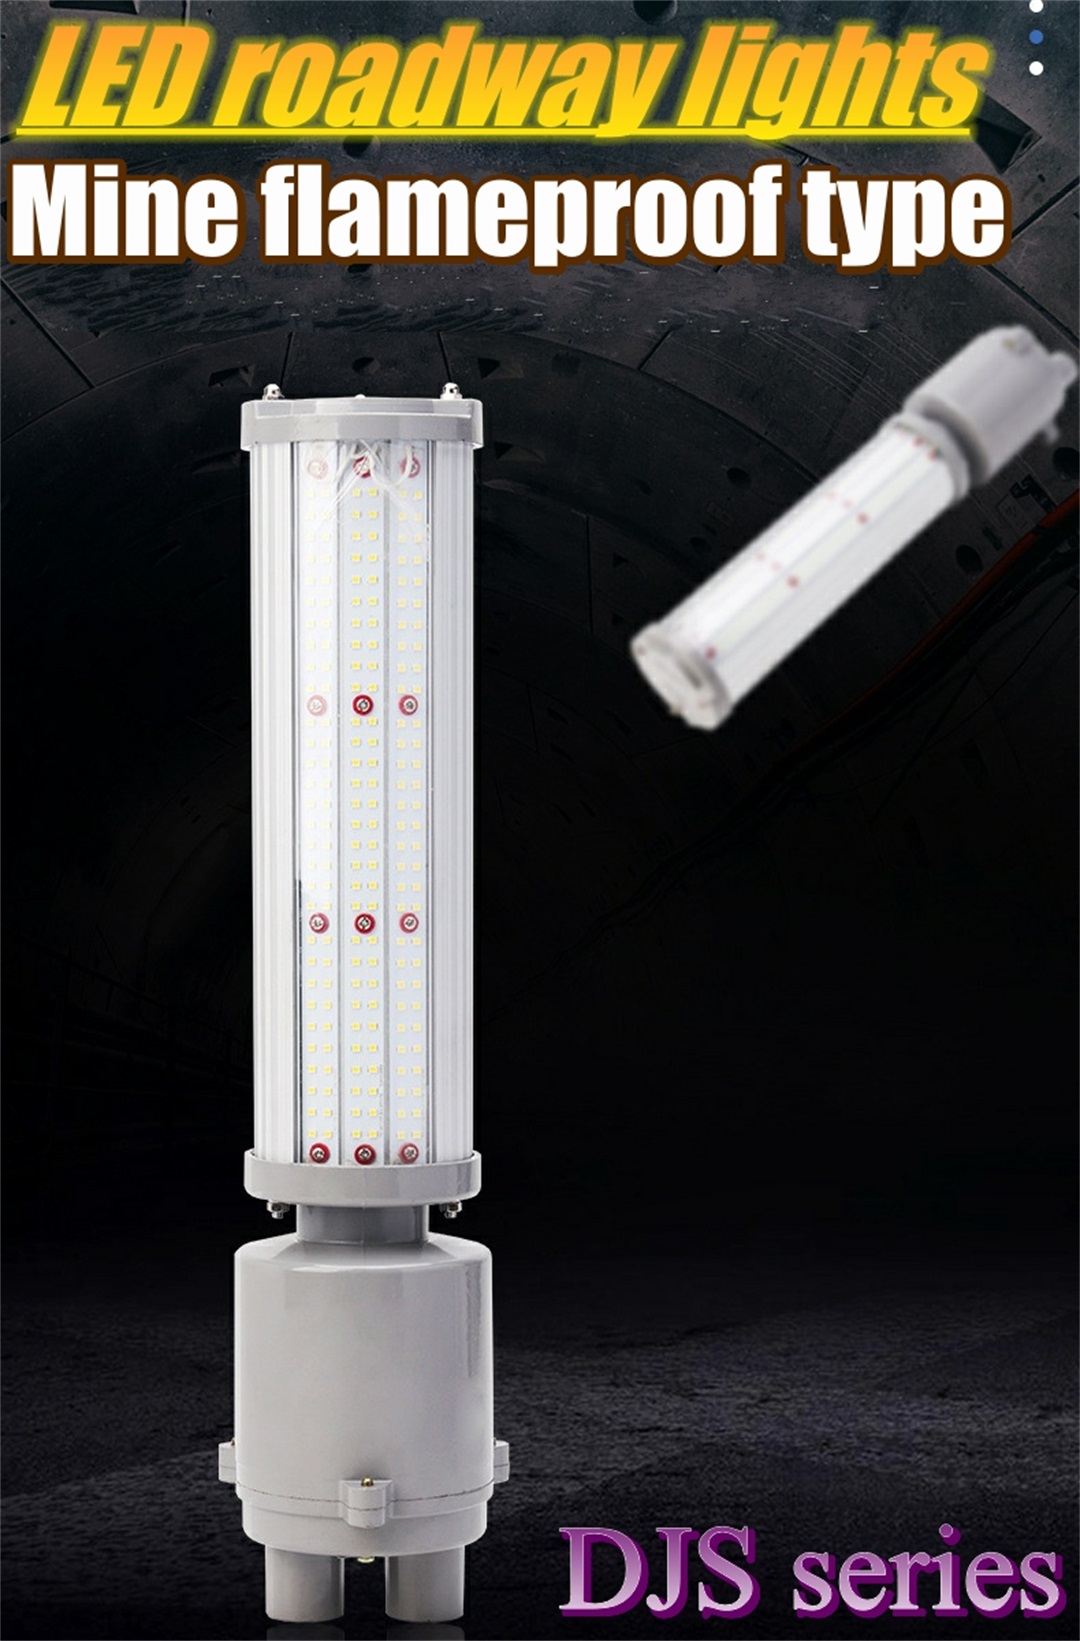 Mine explosion-proof and intrinsically safe LED roadway lamp